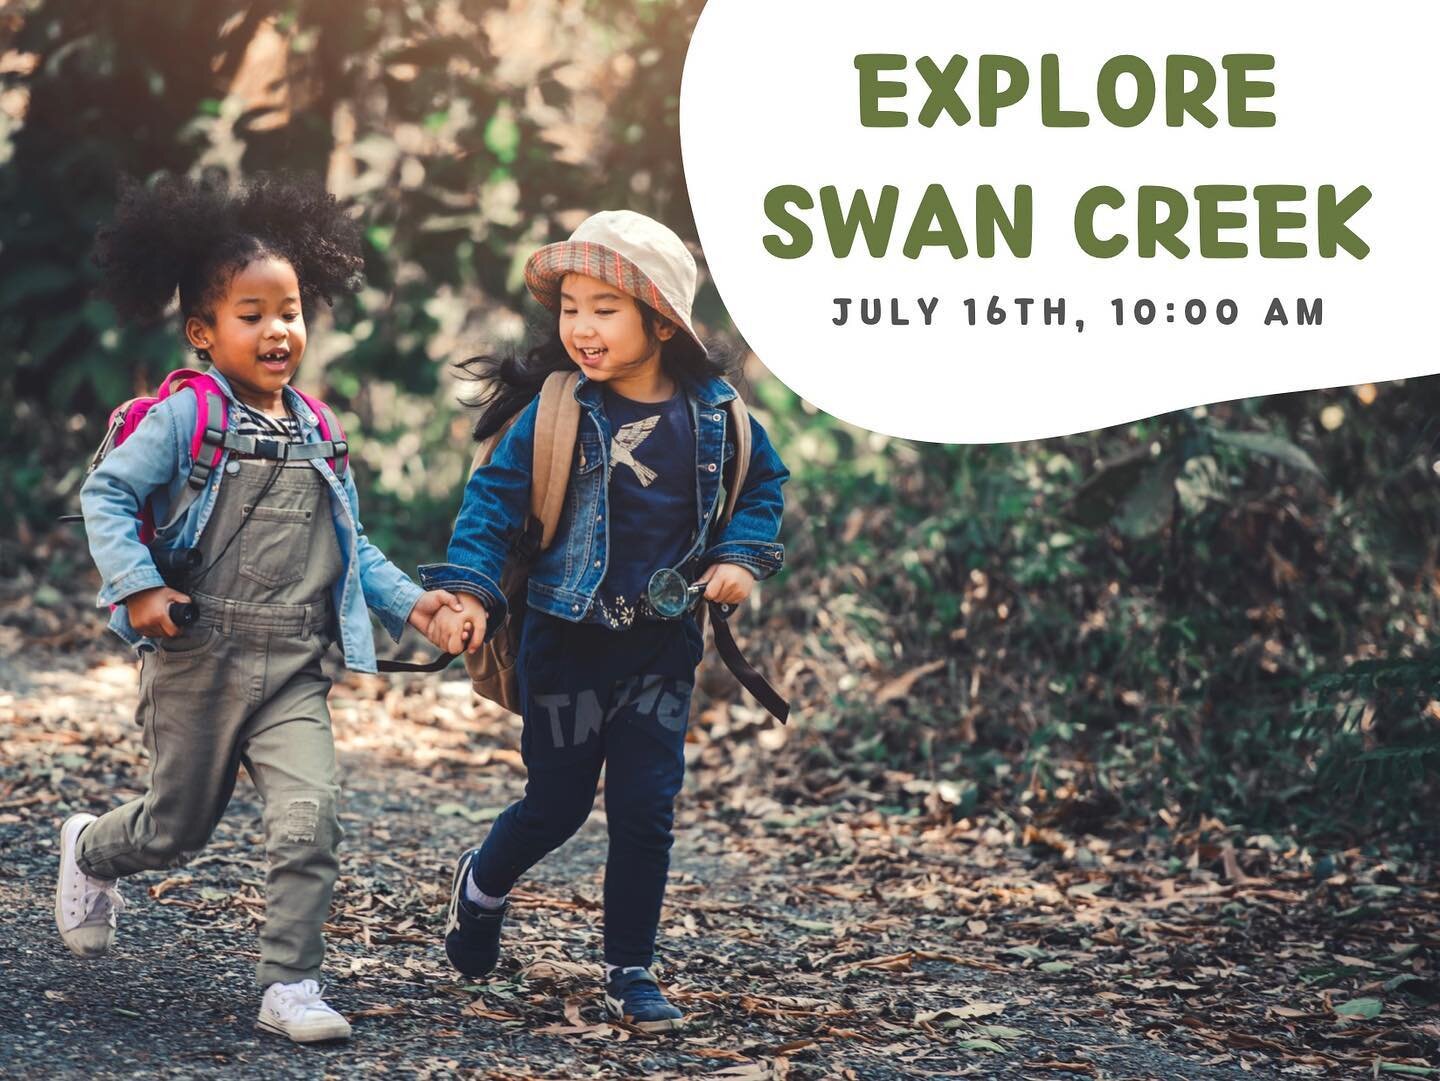 Bring your kids and come explore Swan Creek with us next month! During this family program, we will discover the amazing plant diversity found in Swan Creek. We will learn how the plants work together and why that is important. We will end with a fun